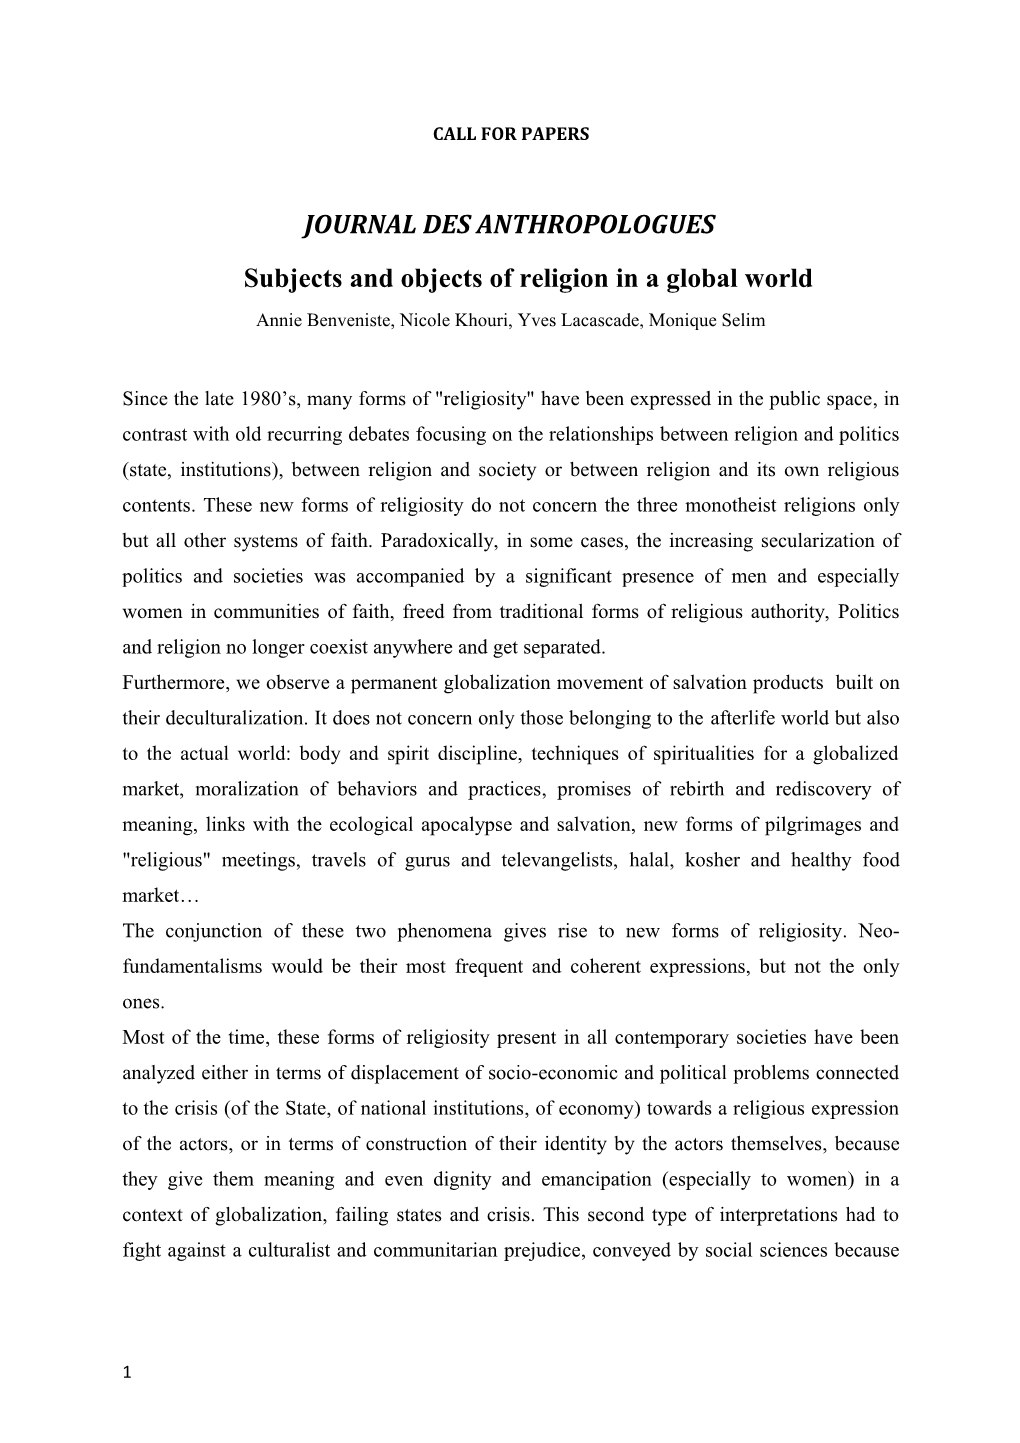 Subjects and Objects of Religion in a Global World